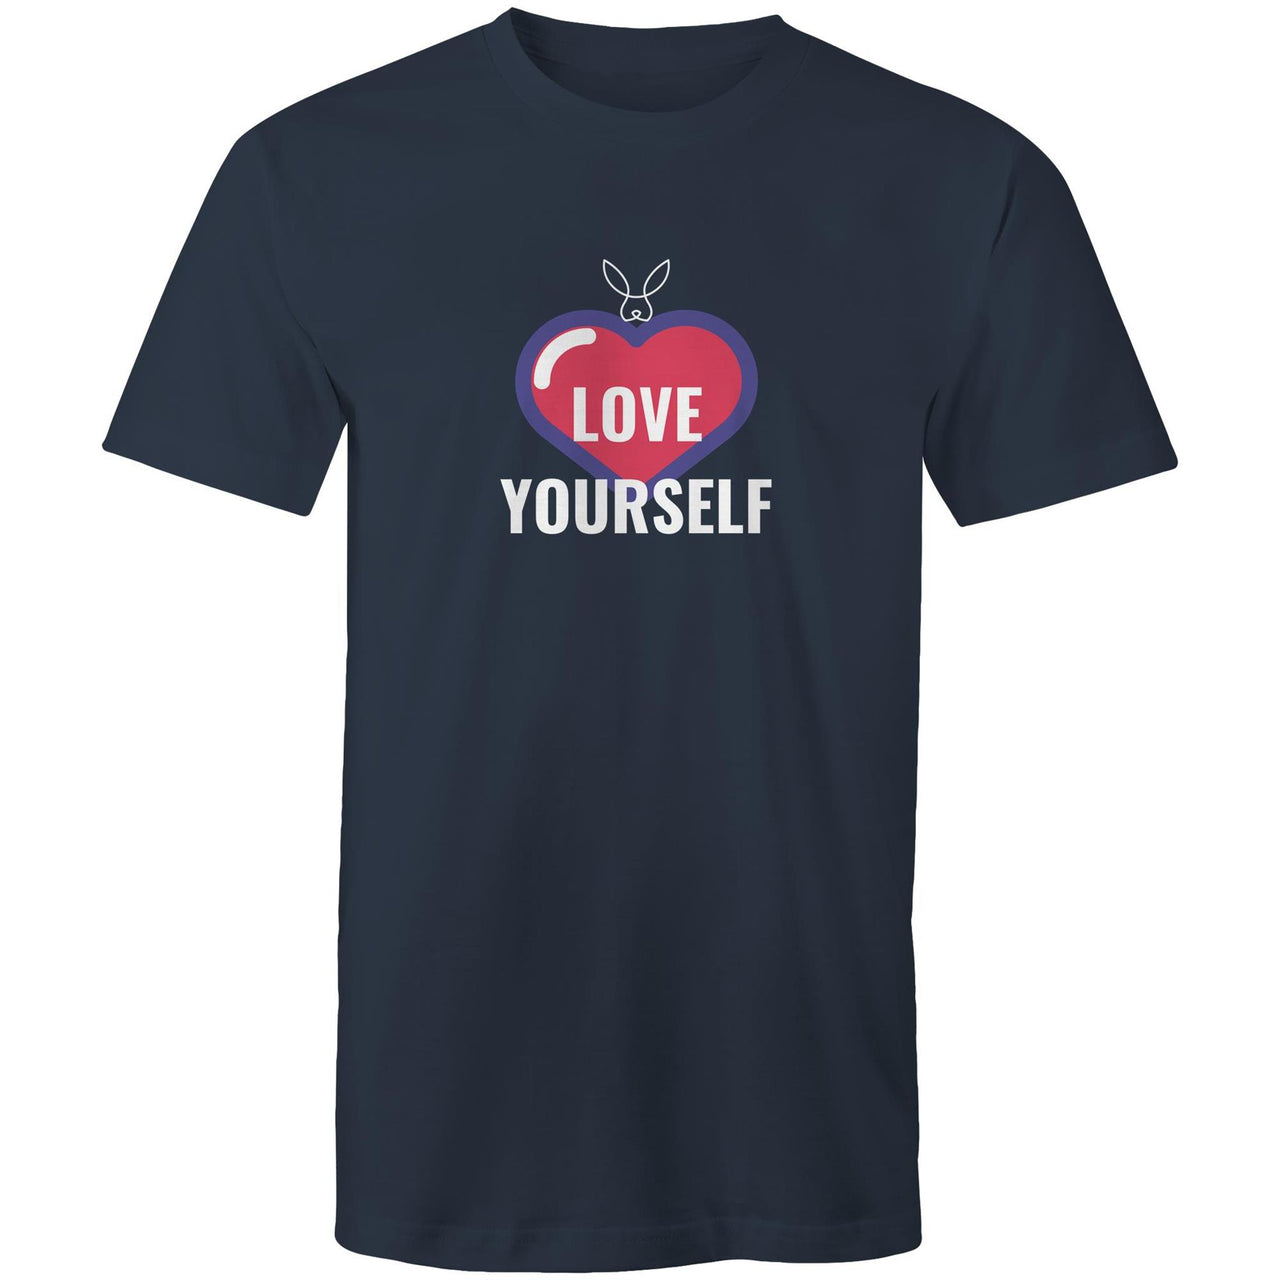 Love Yourself Crew T-Shirt by CBF Clothing Navy